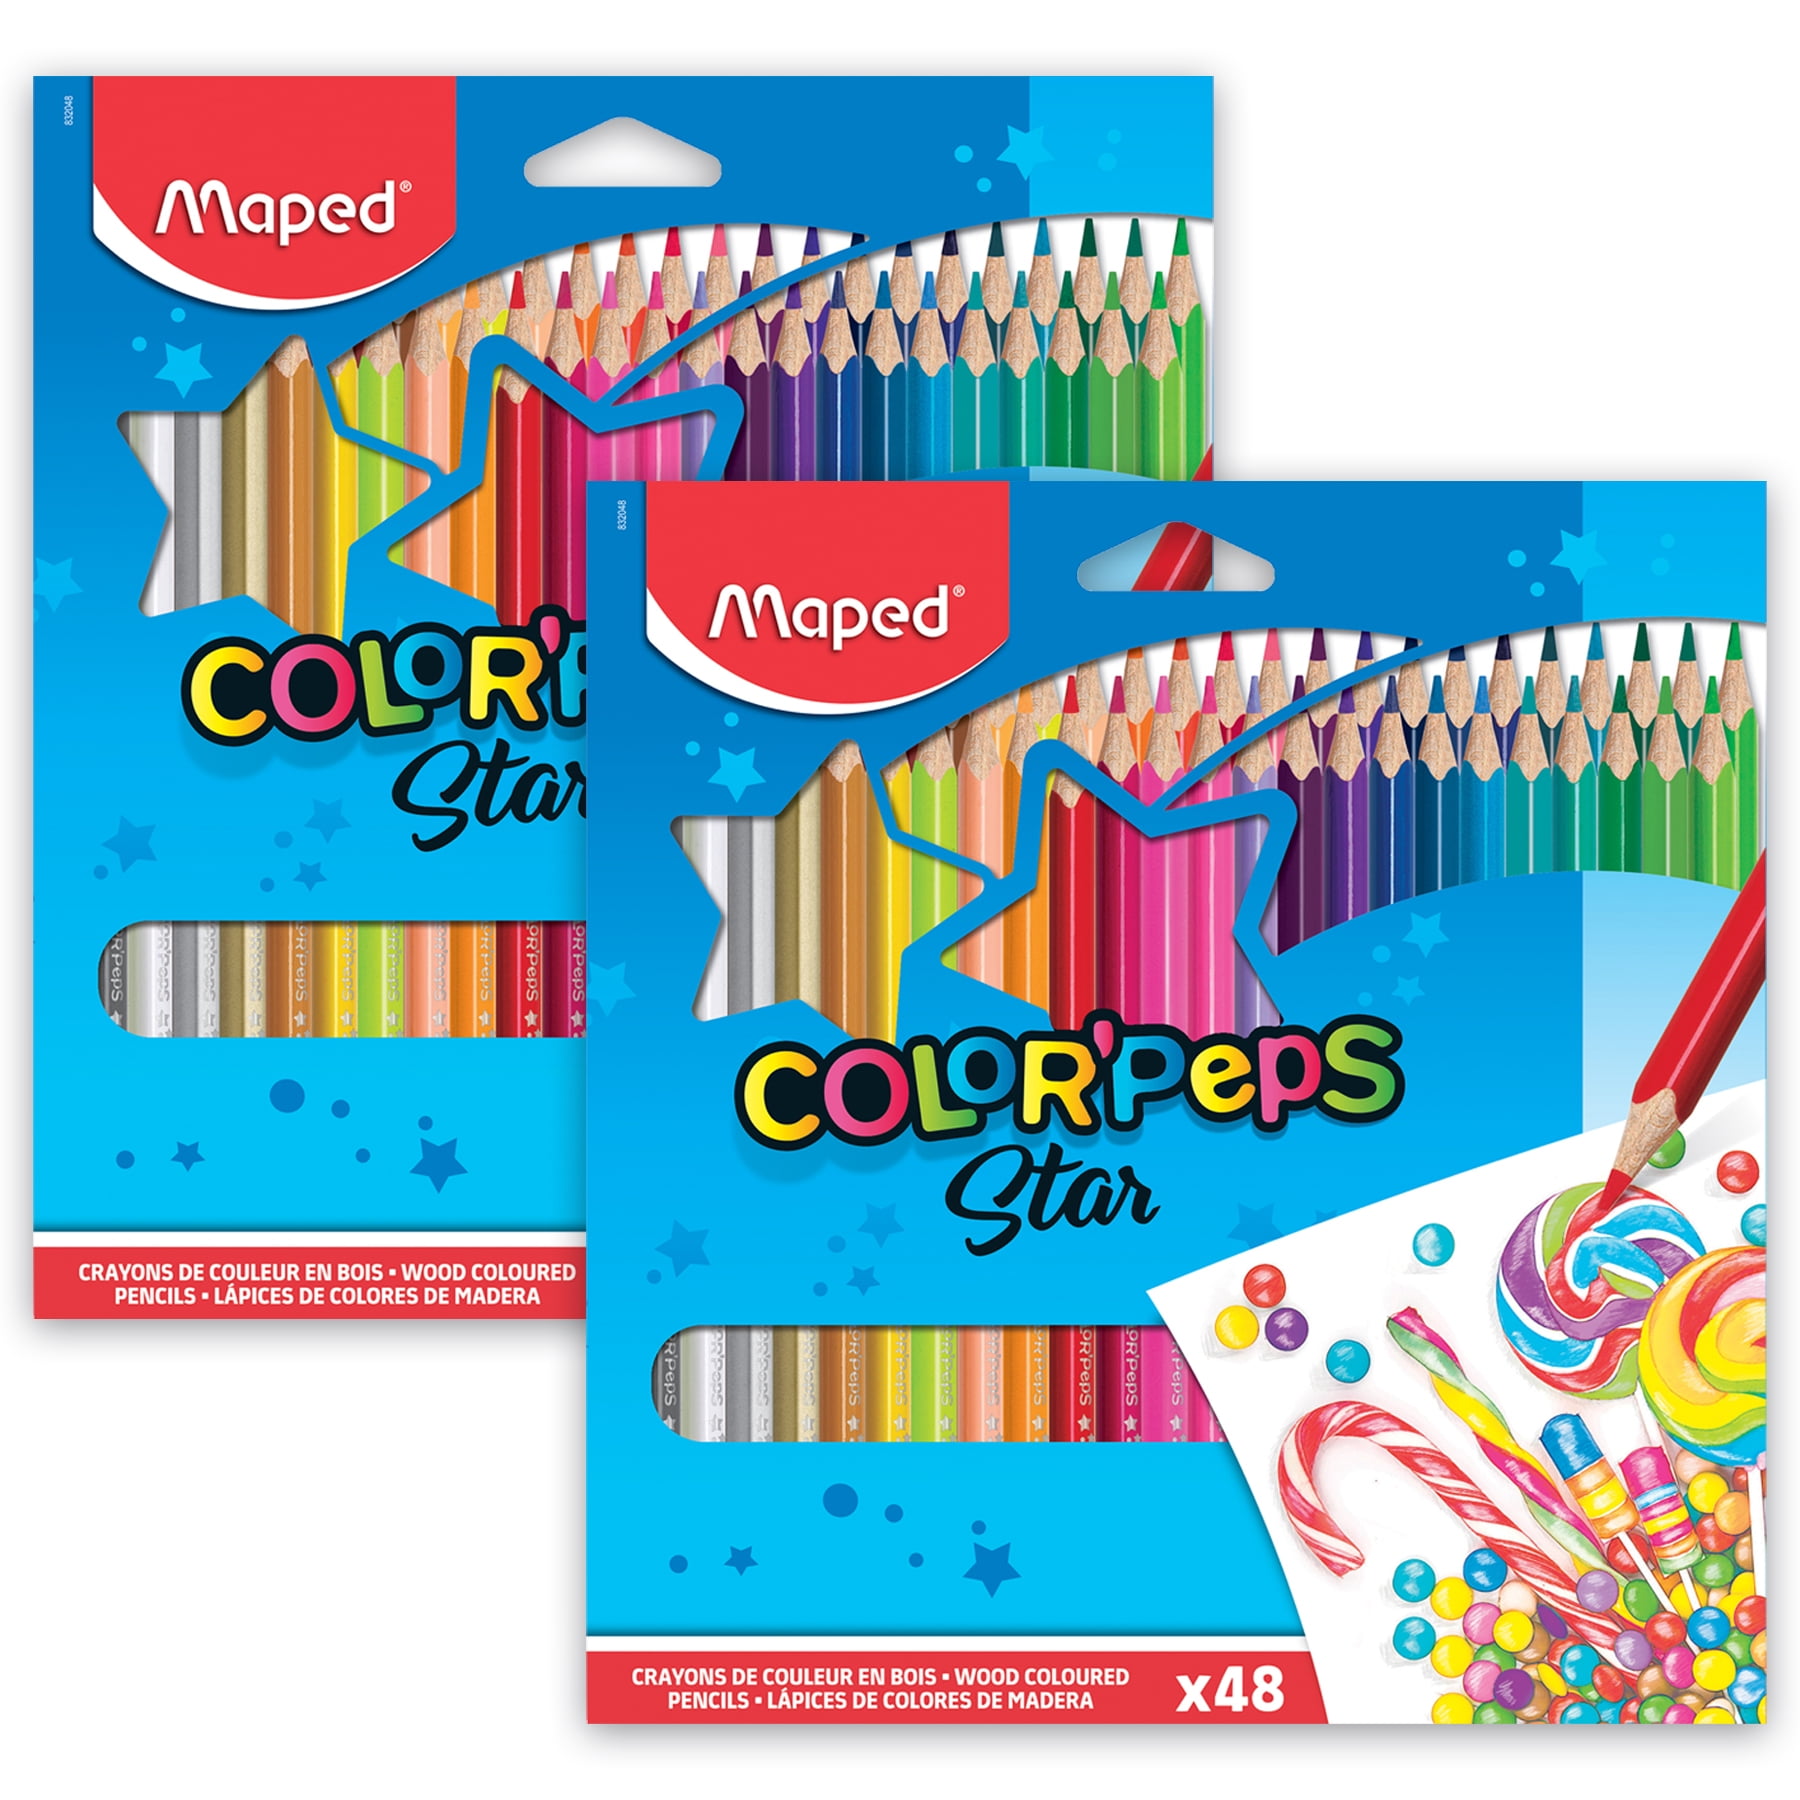 MAPED COLOR'PEPS STAR- BOX OF 72 PENCILS